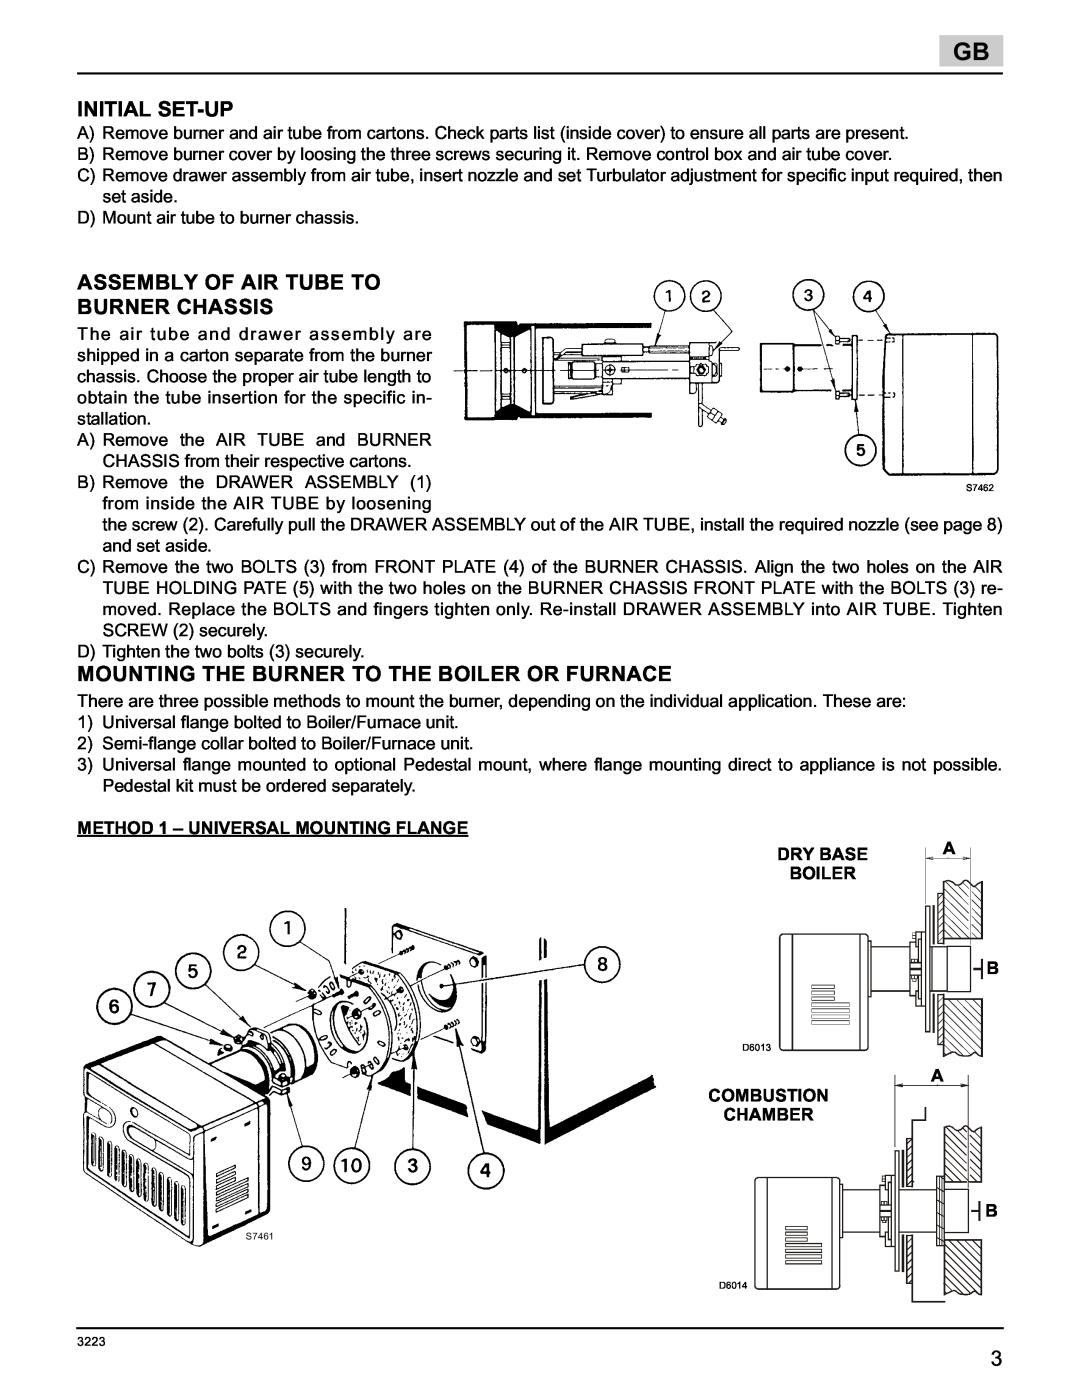 Weil-McLain 800057000-Brn-PO Rie F5 manual Initial Set-Up, Assembly Of Air Tube To Burner Chassis, Dry Base, Boiler 